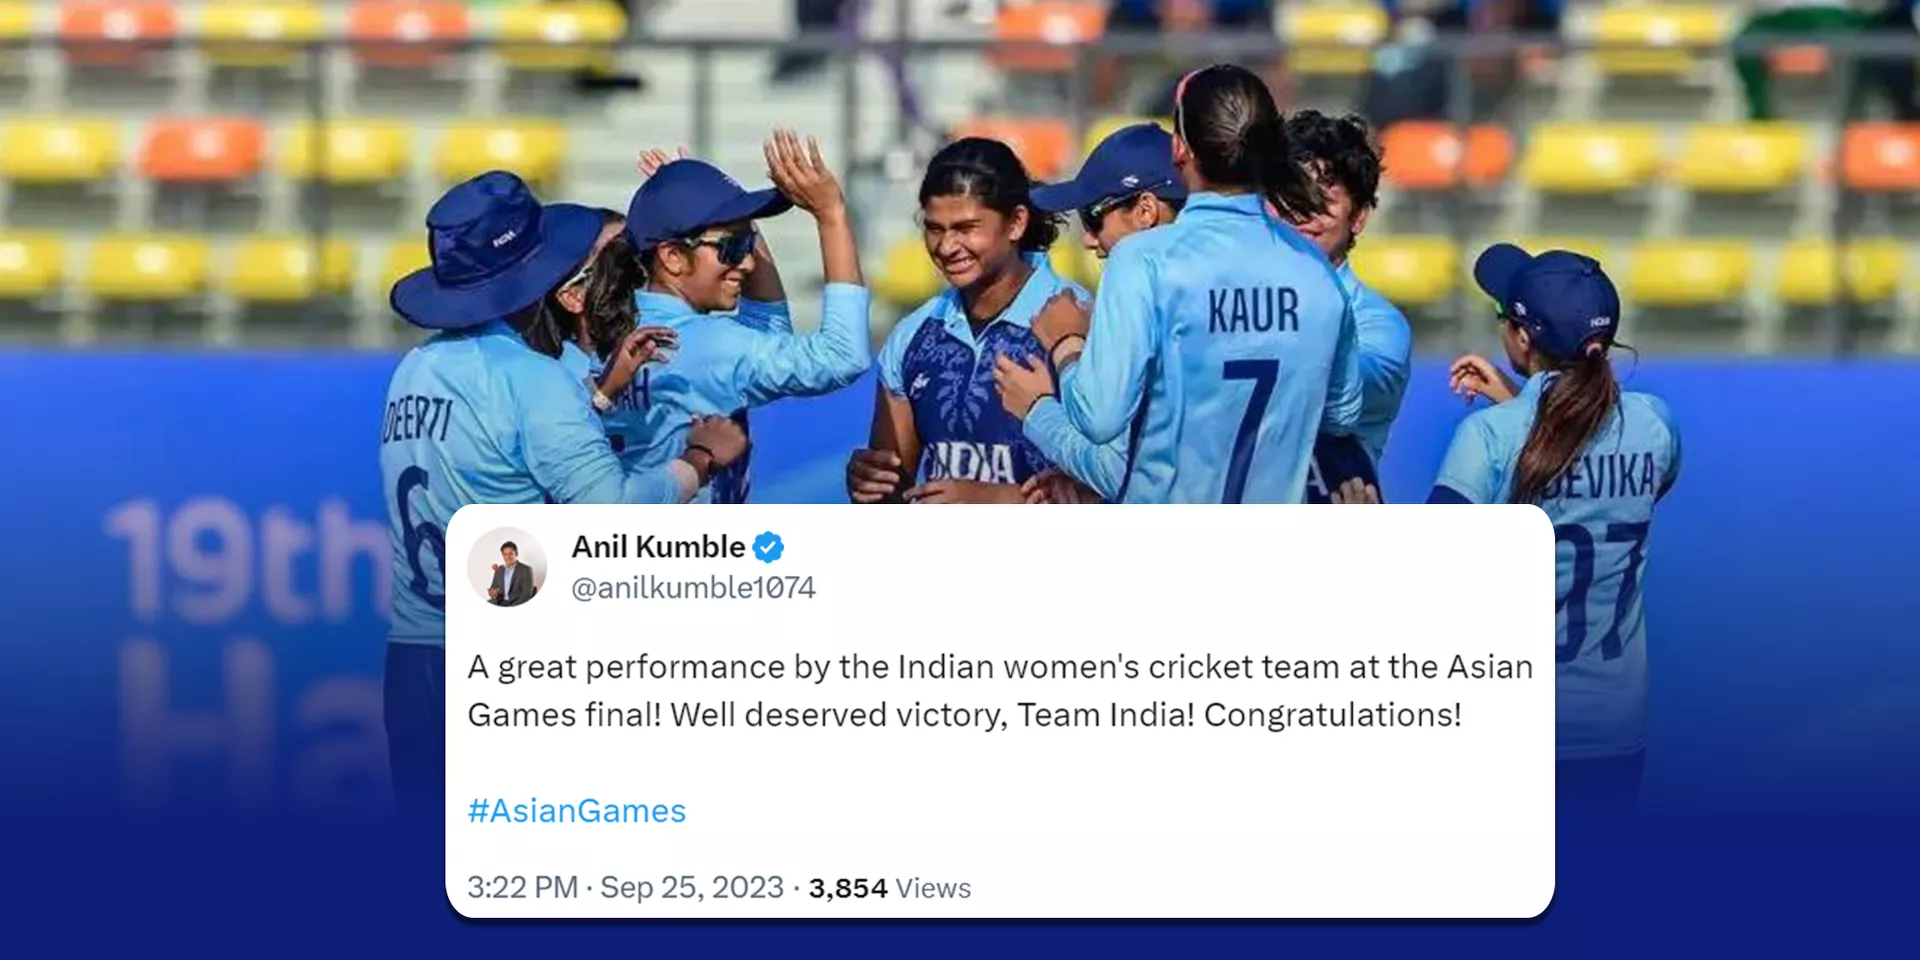 Twitter erupts as India women's cricket team defeat Sri Lanka in final to win Asian Games gold medal